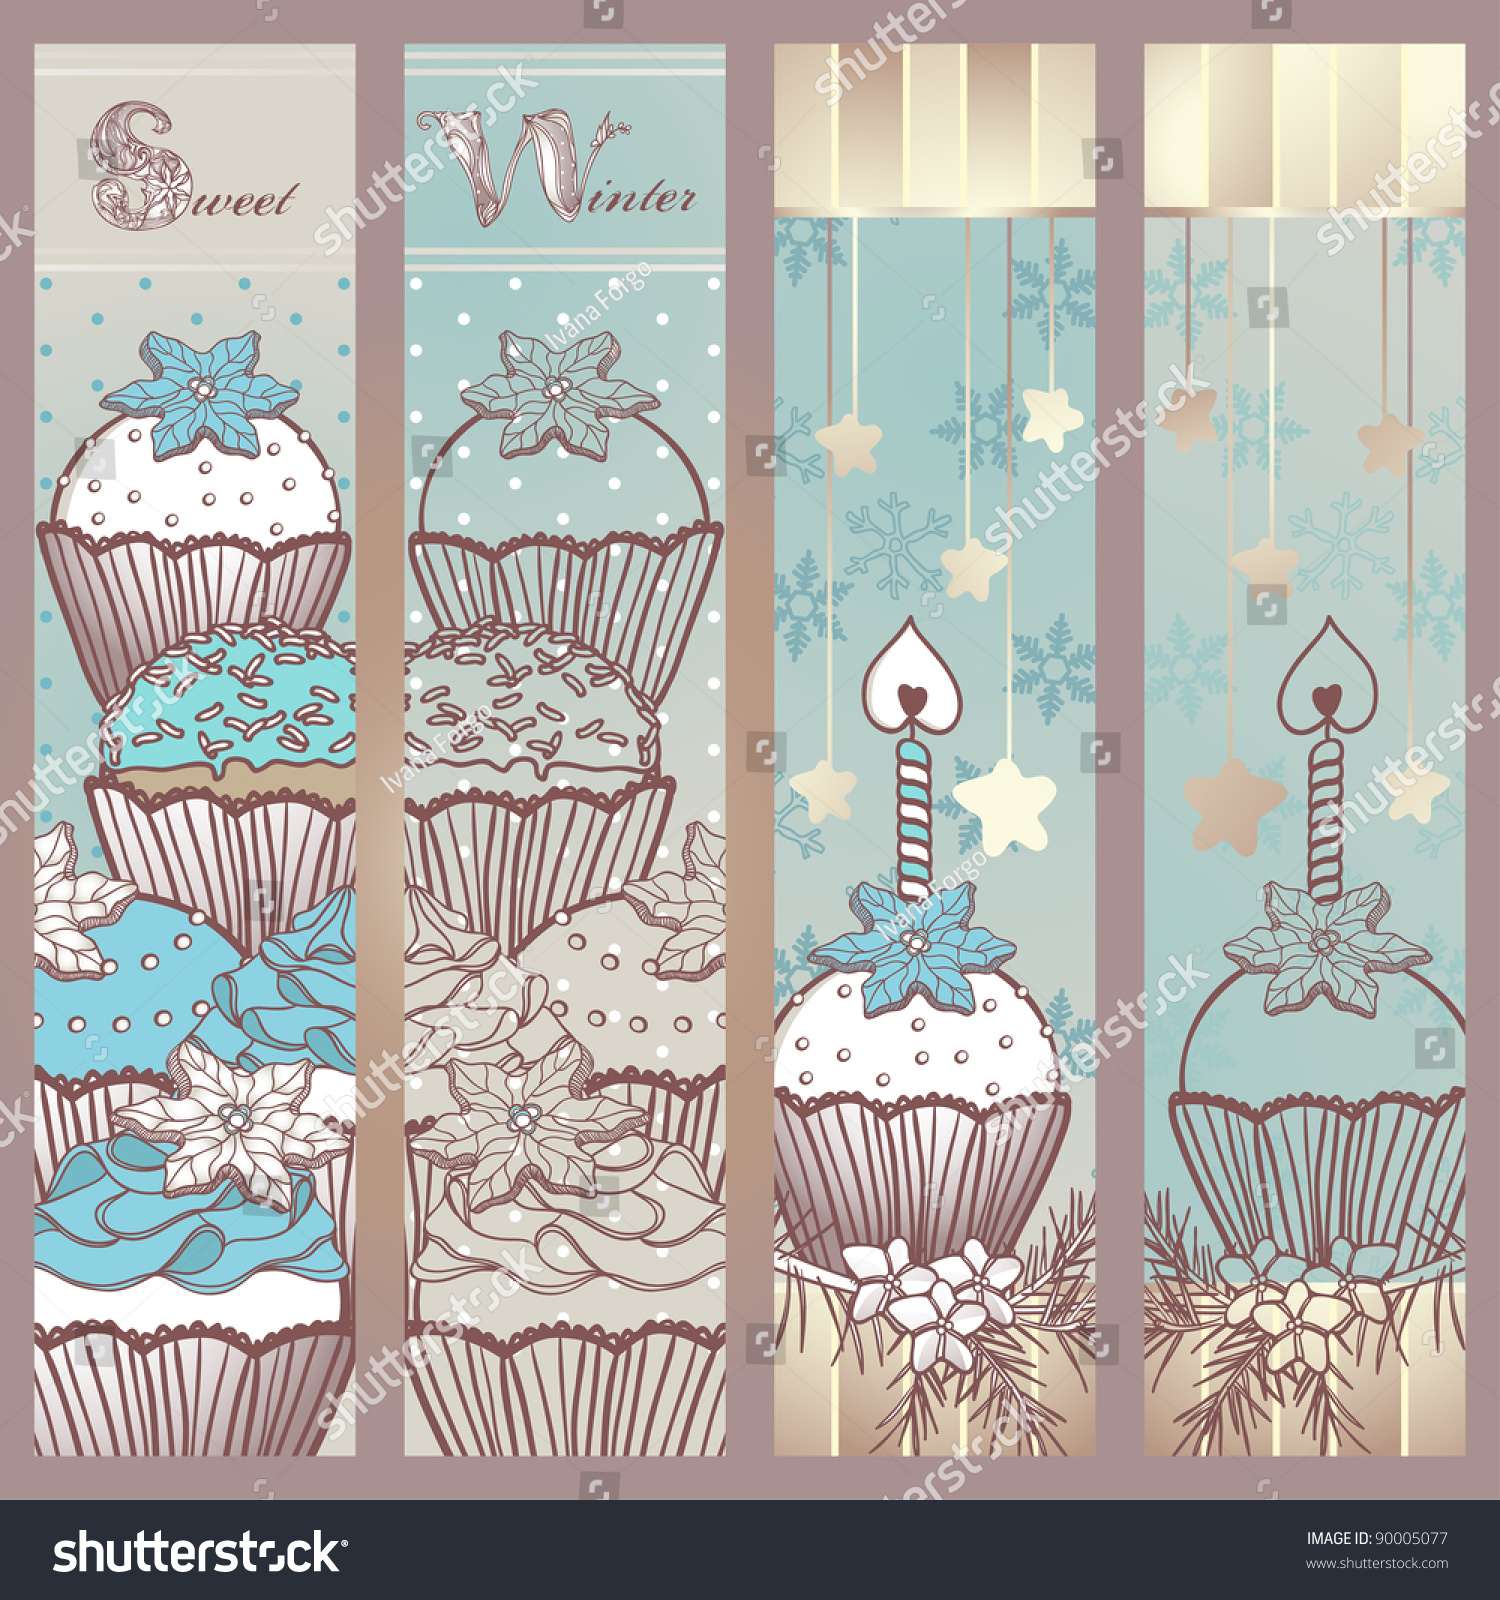 sweet-winter-bookmarks-stock-vector-royalty-free-90005077